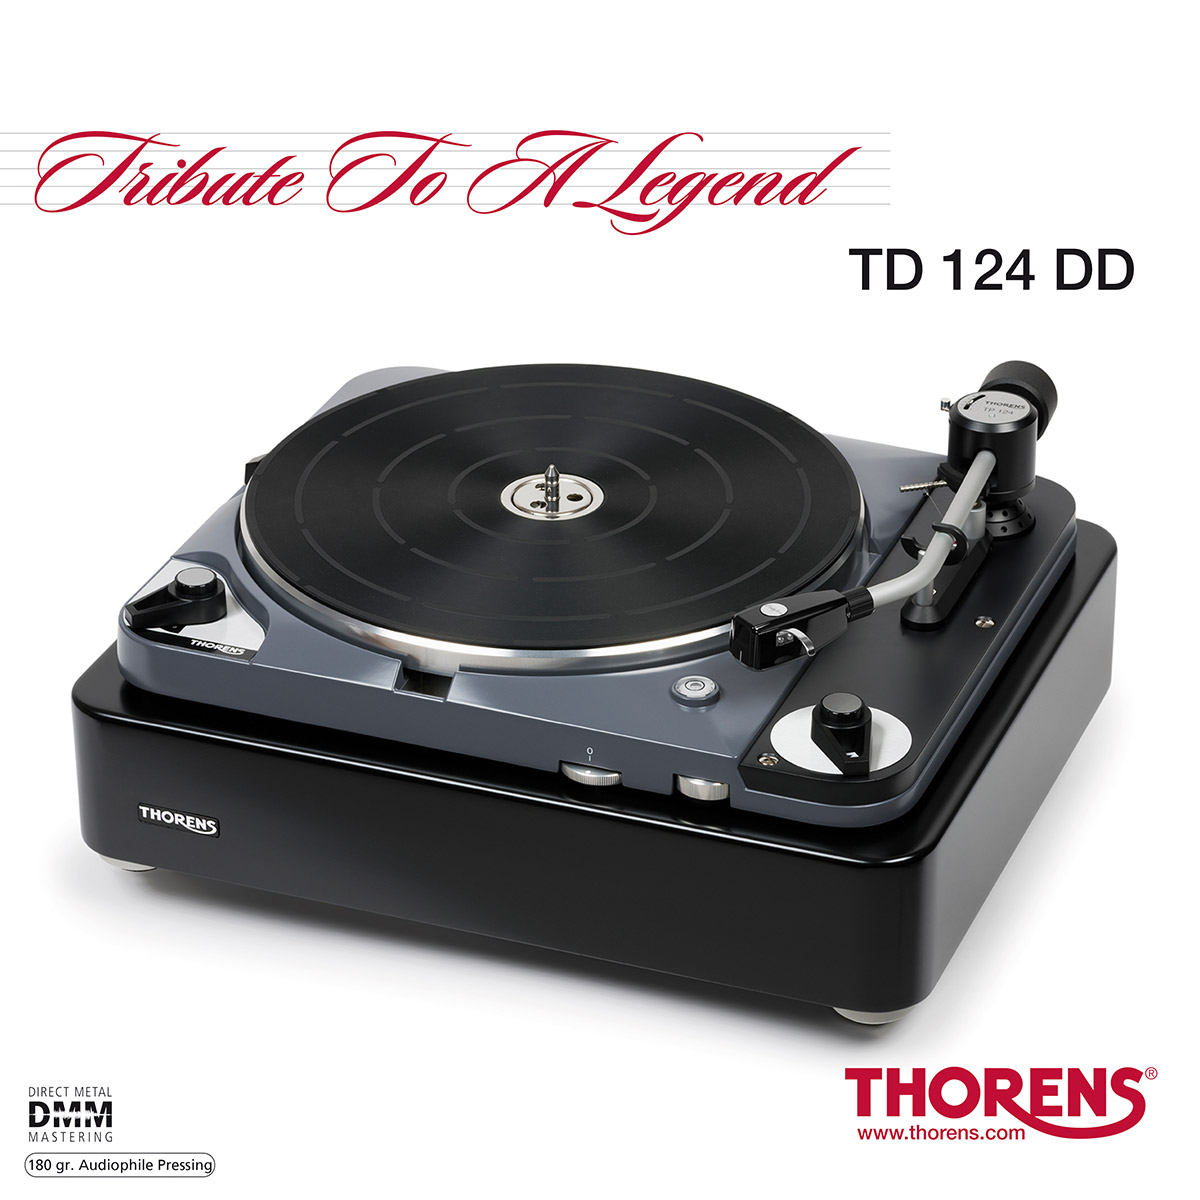 Thorens - Tribute To A Legend